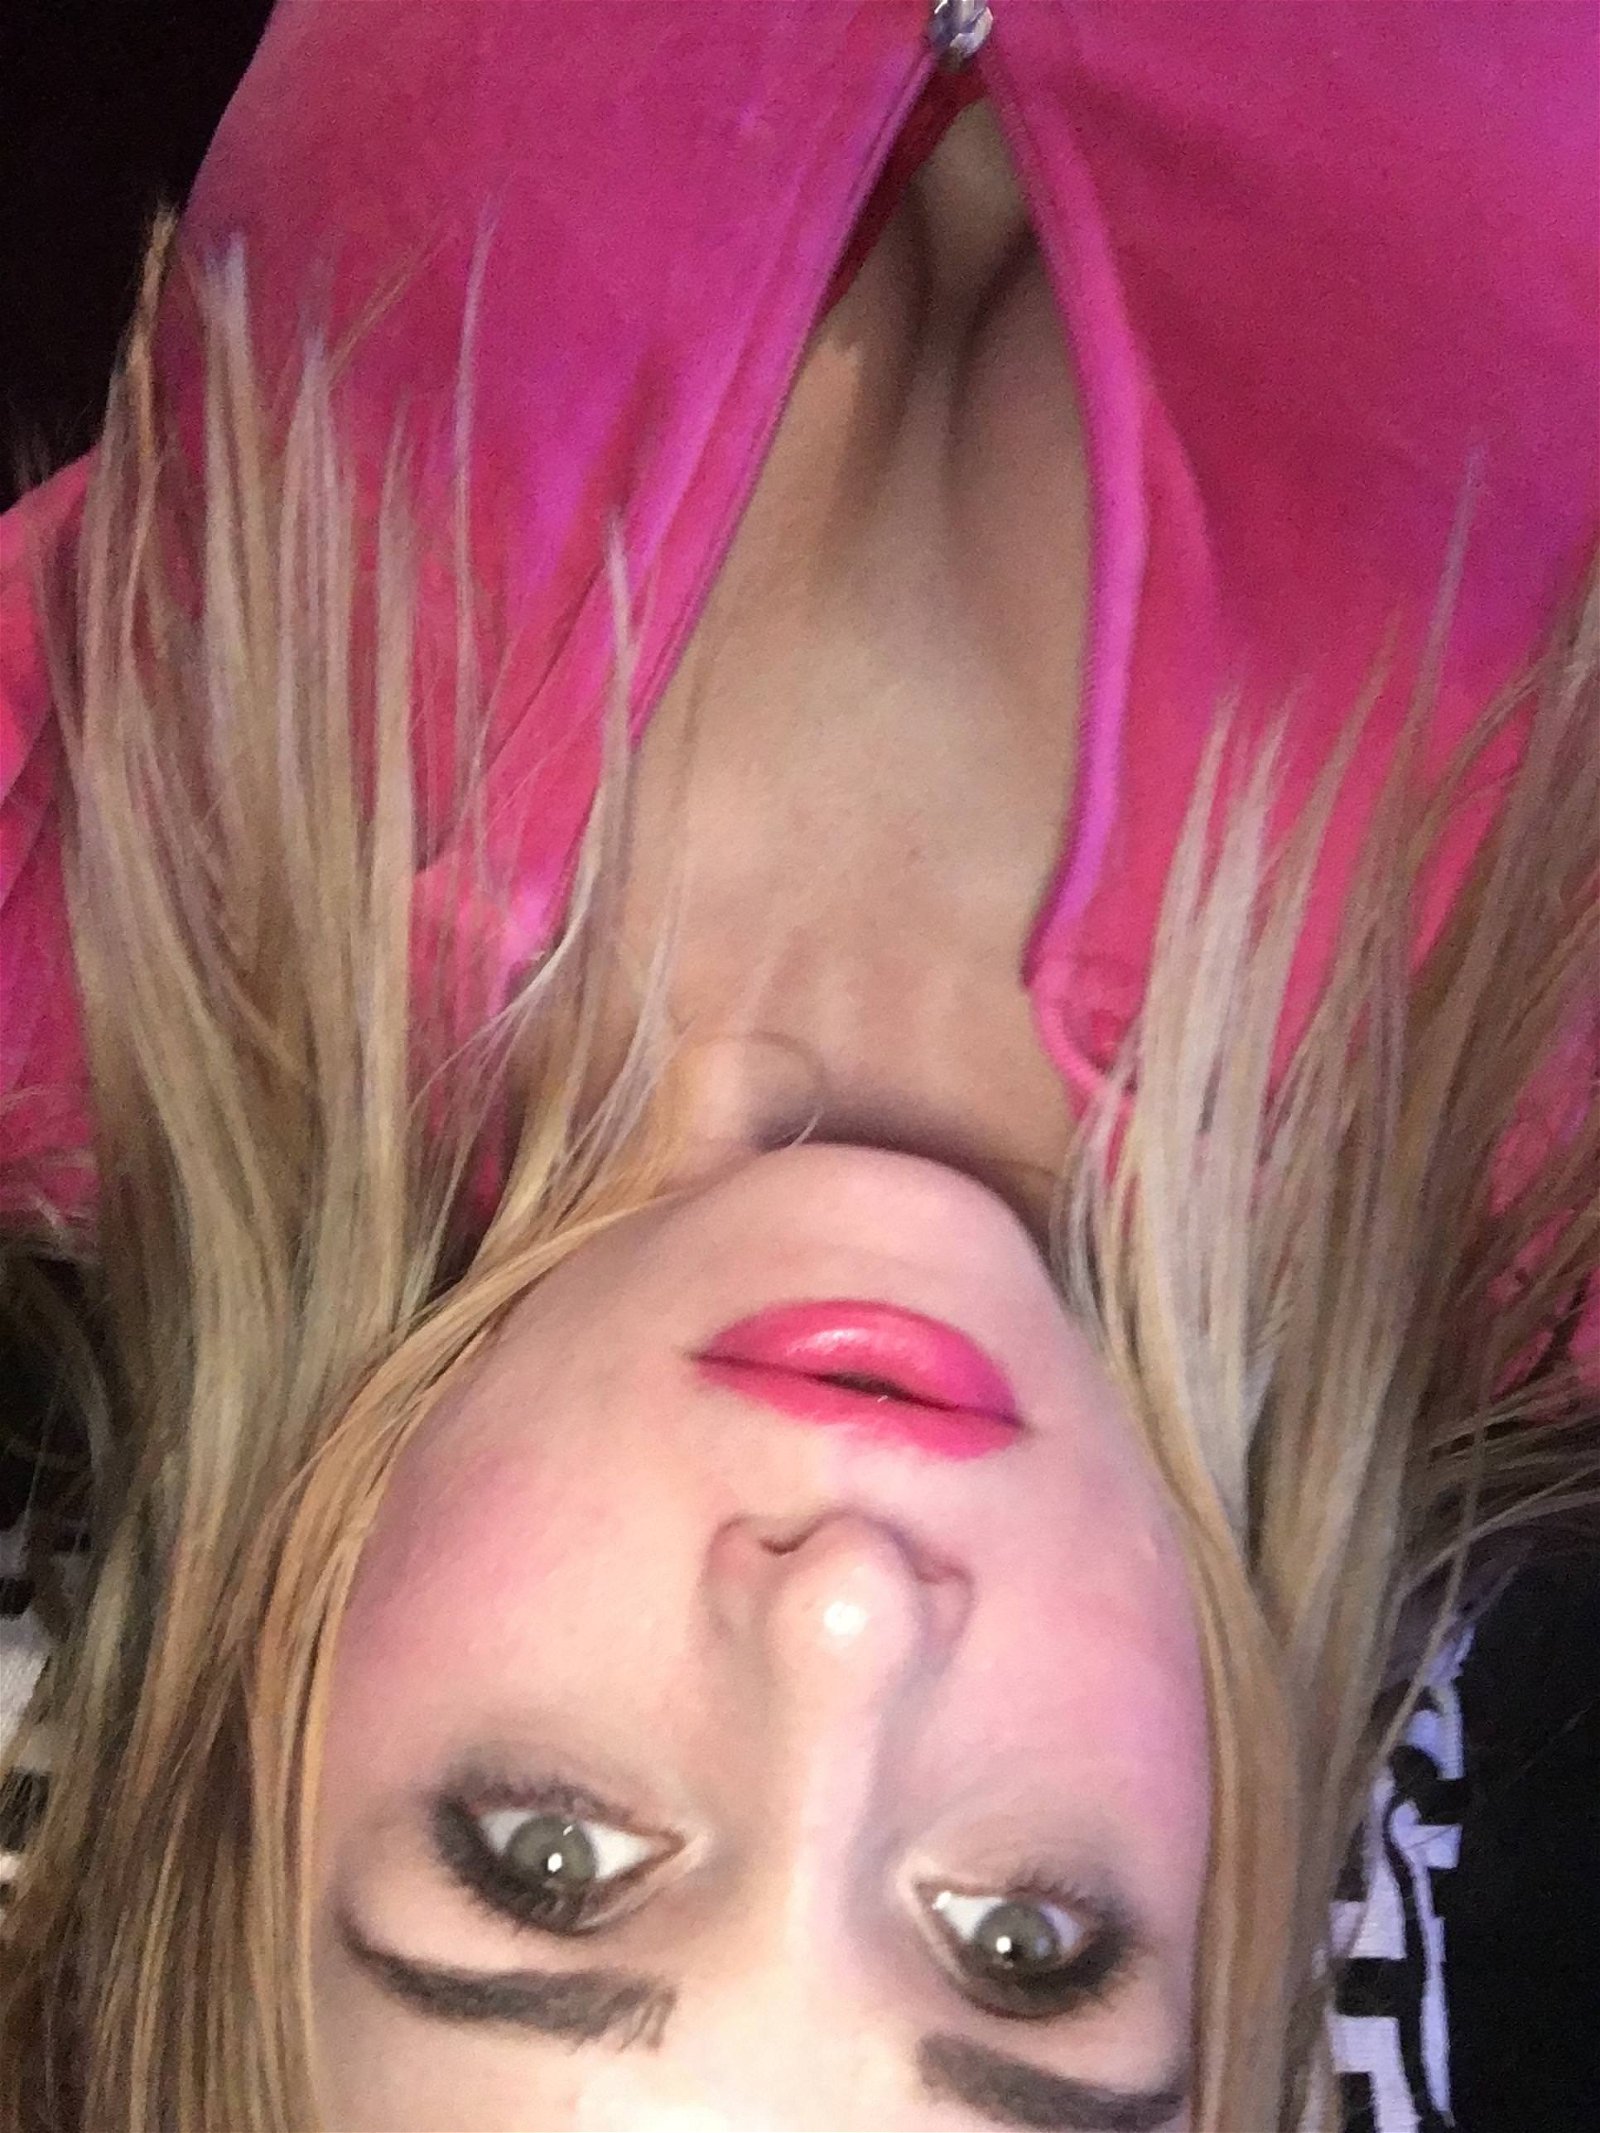 Photo by Lindsey Oh with the username @lindseyoh, who is a verified user,  July 15, 2018 at 3:01 AM and the text says 'should I unzip? #amateur #modeling #pink #lips #greeneyes #blonde #blond #blondie #dsl #tease #model'